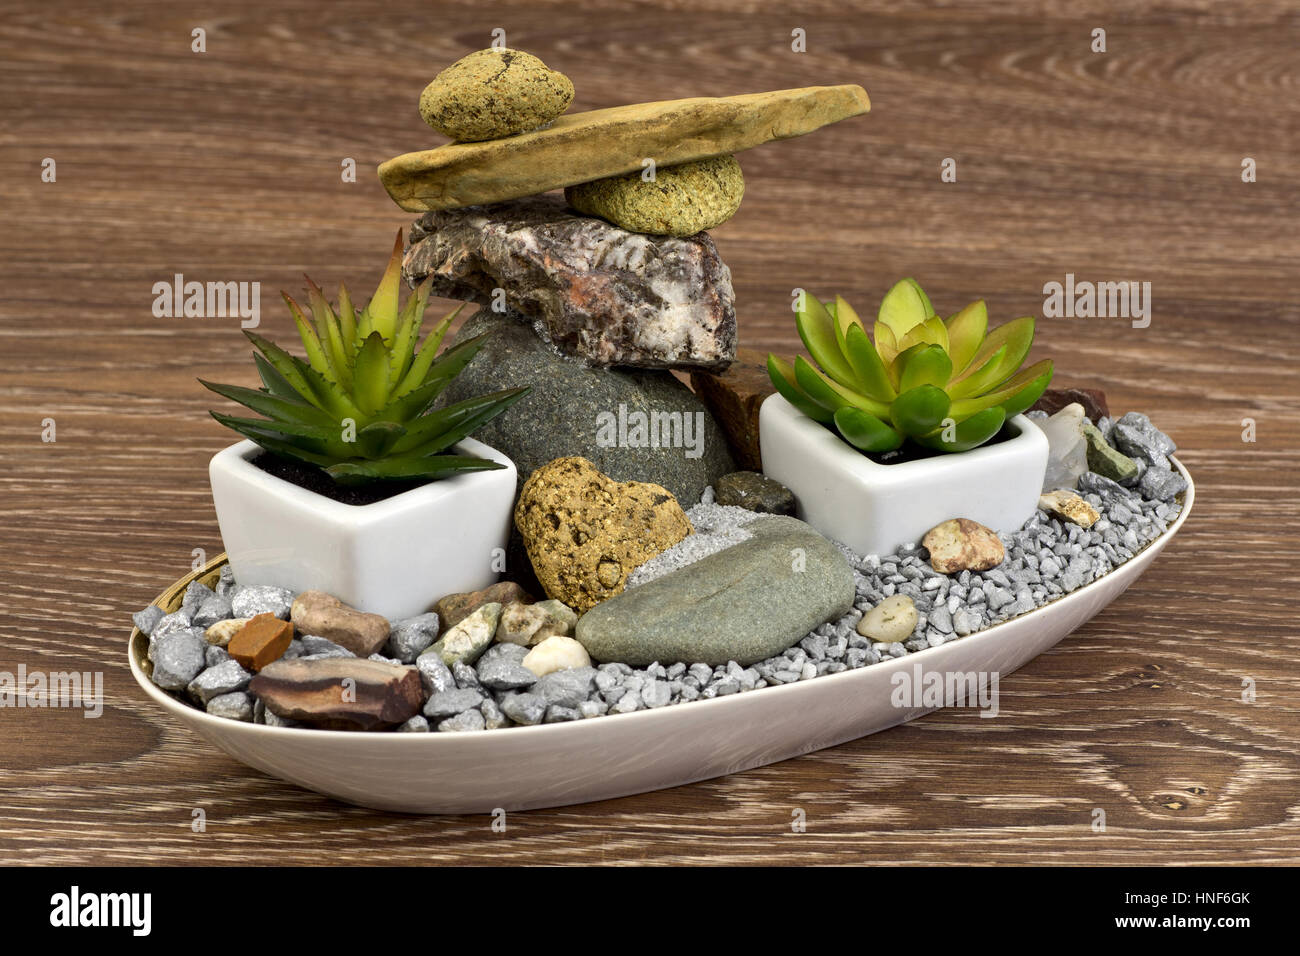 Mini-garden with balanced stones and succulents Stock Photo